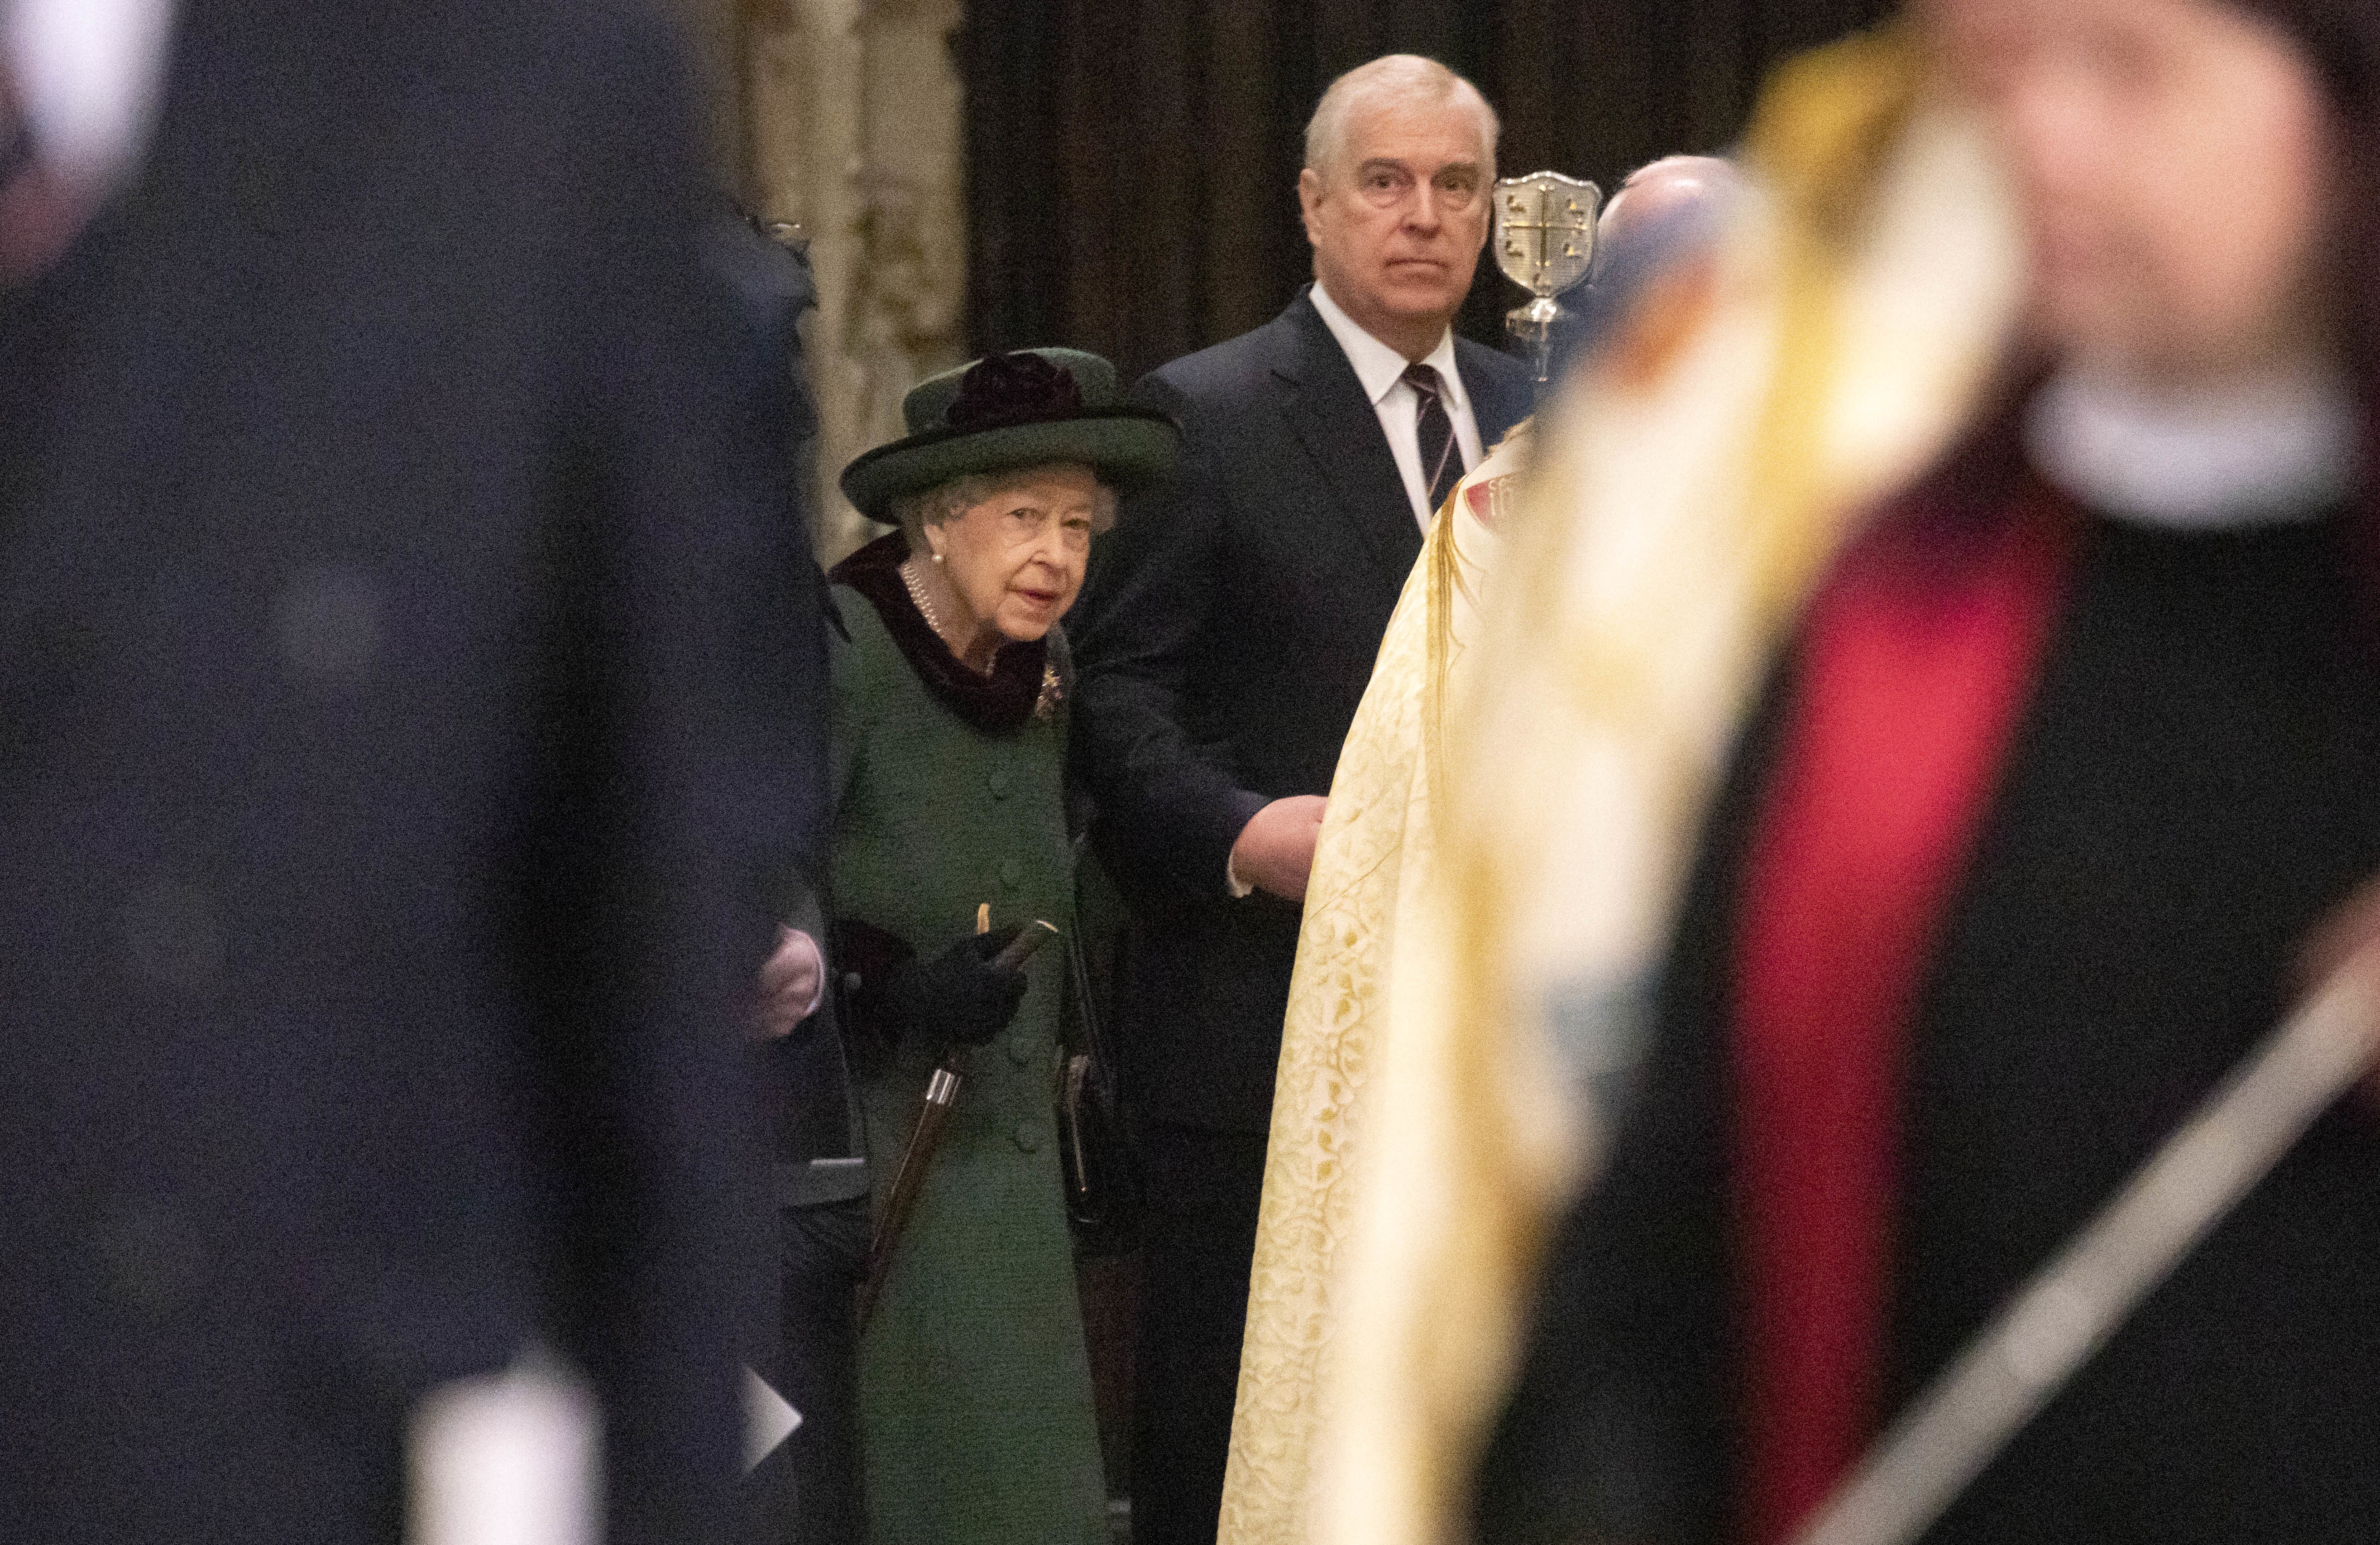 The Queen and Andrew at the service (Richard Pohle/The Times/PA)